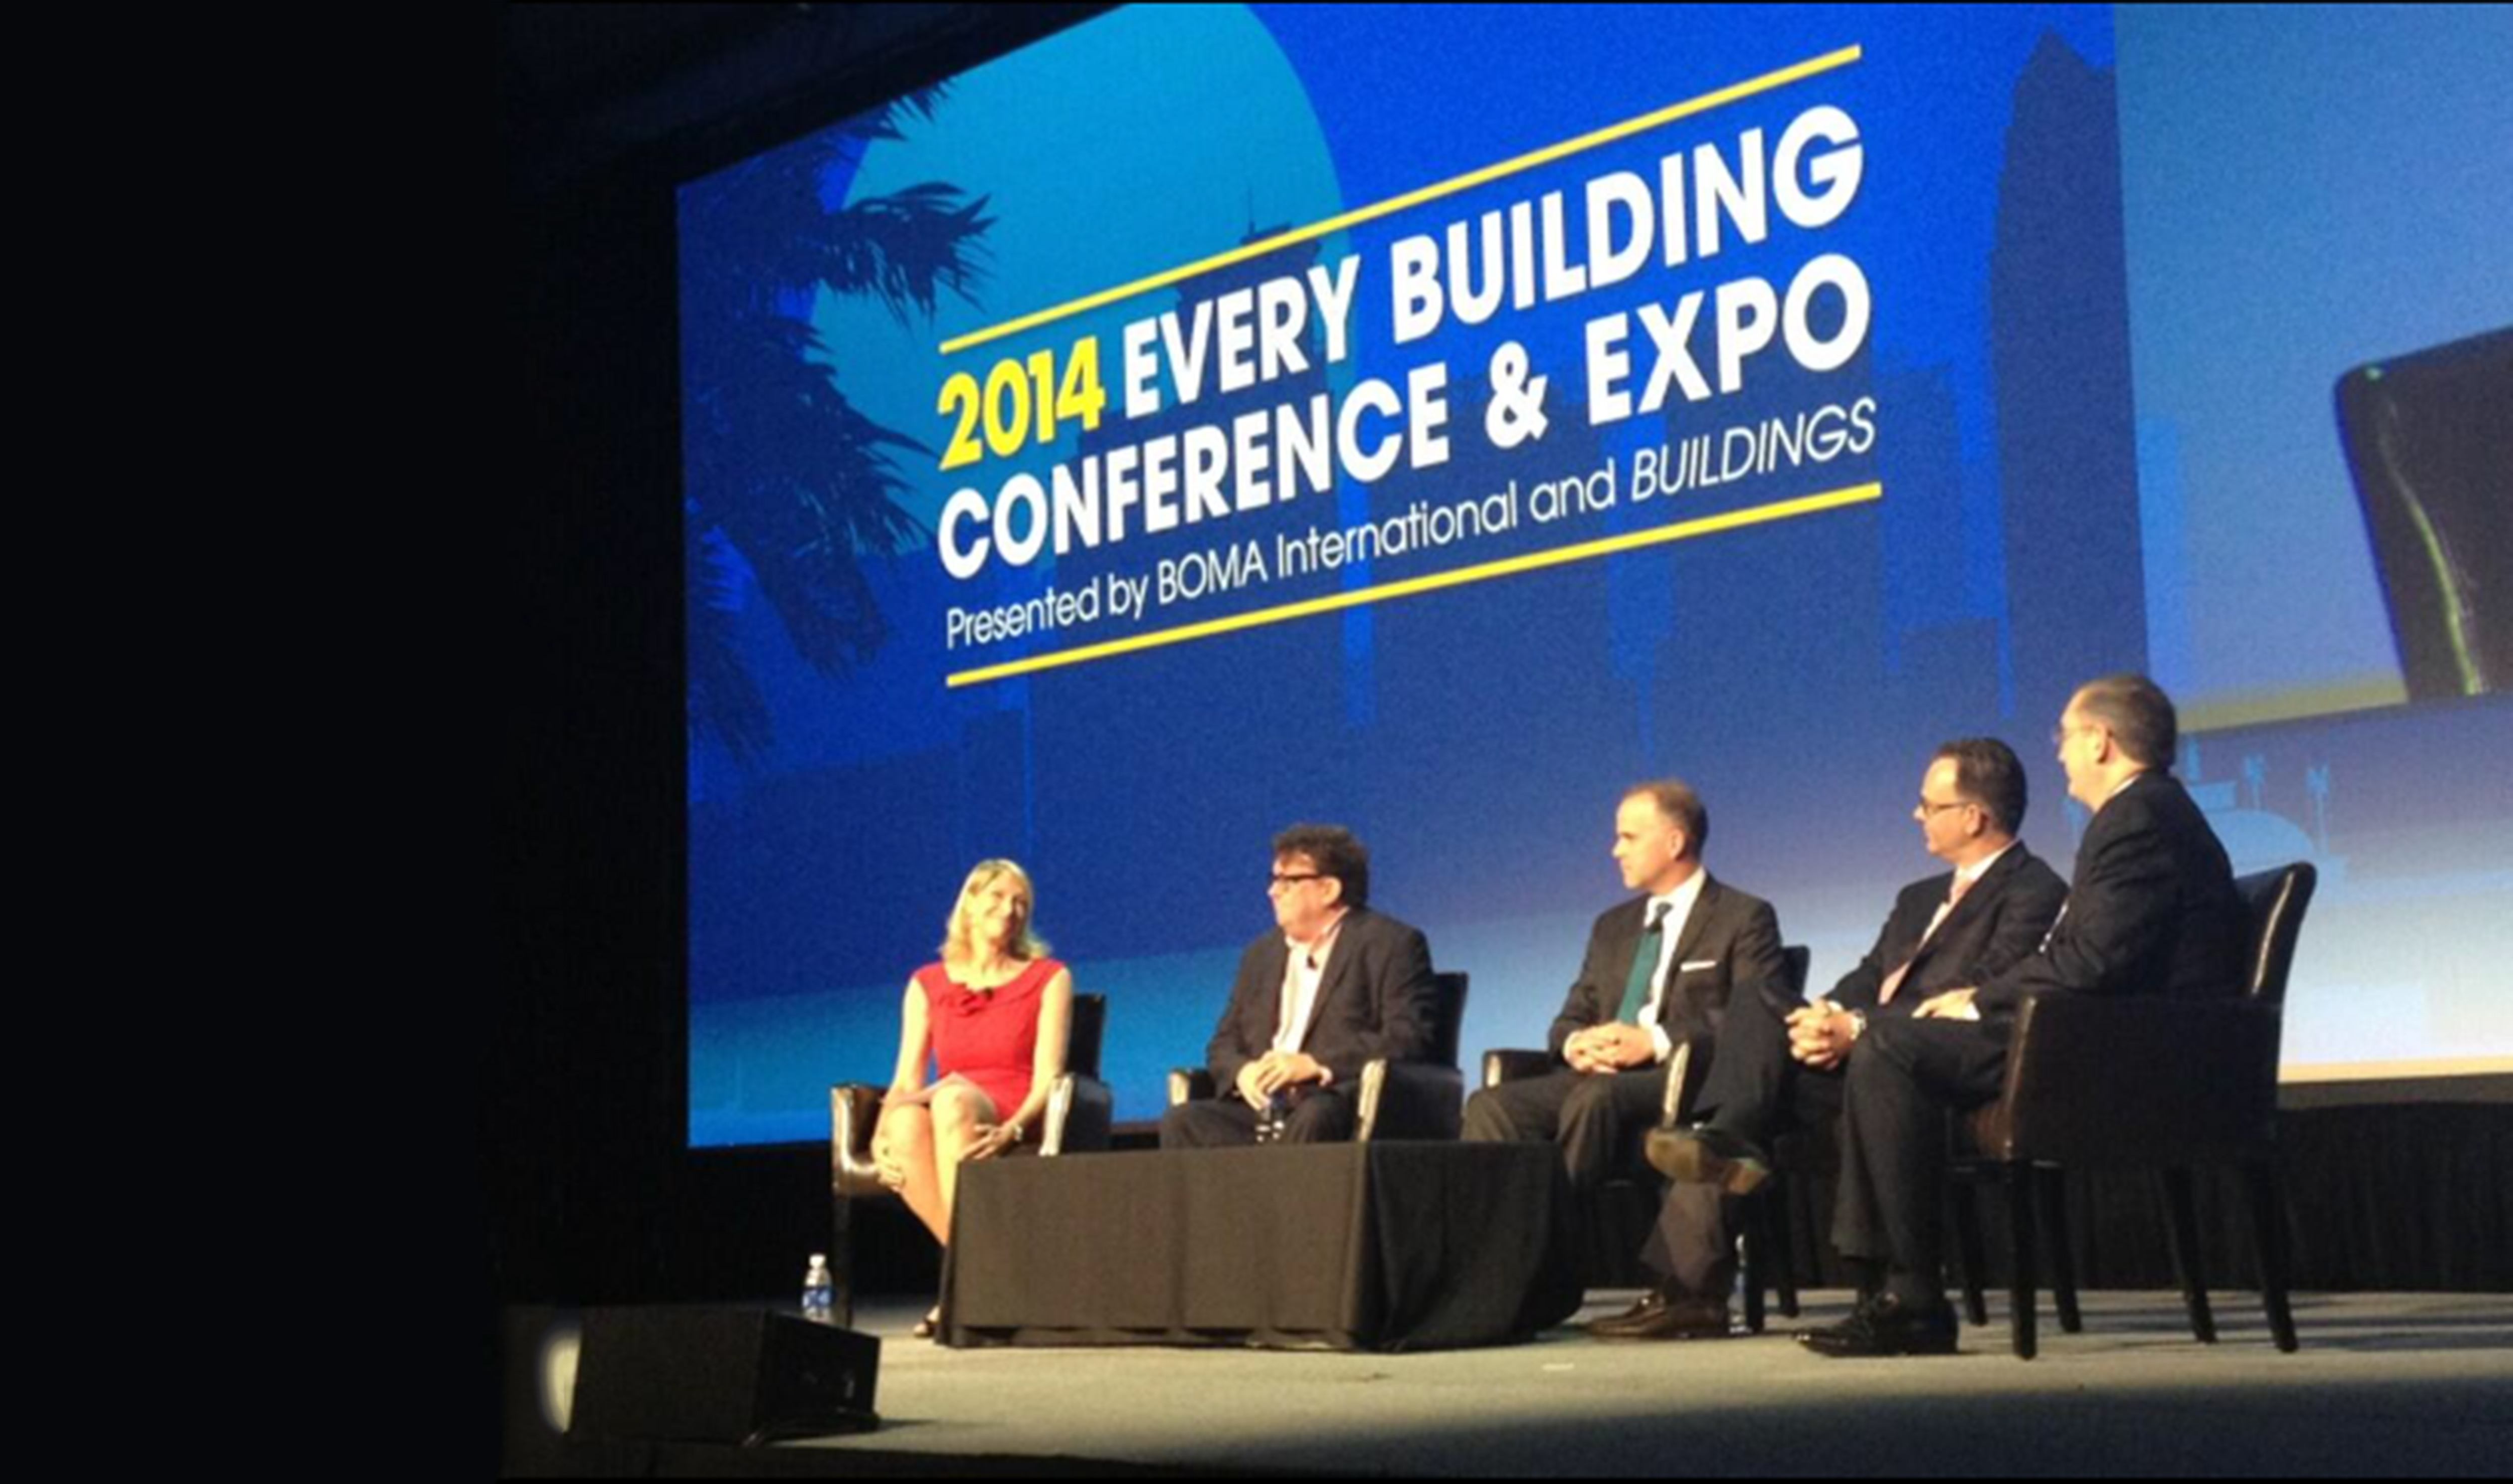 Tracy Brower speaking on a panel at 2014 Every Building Conference & Expo